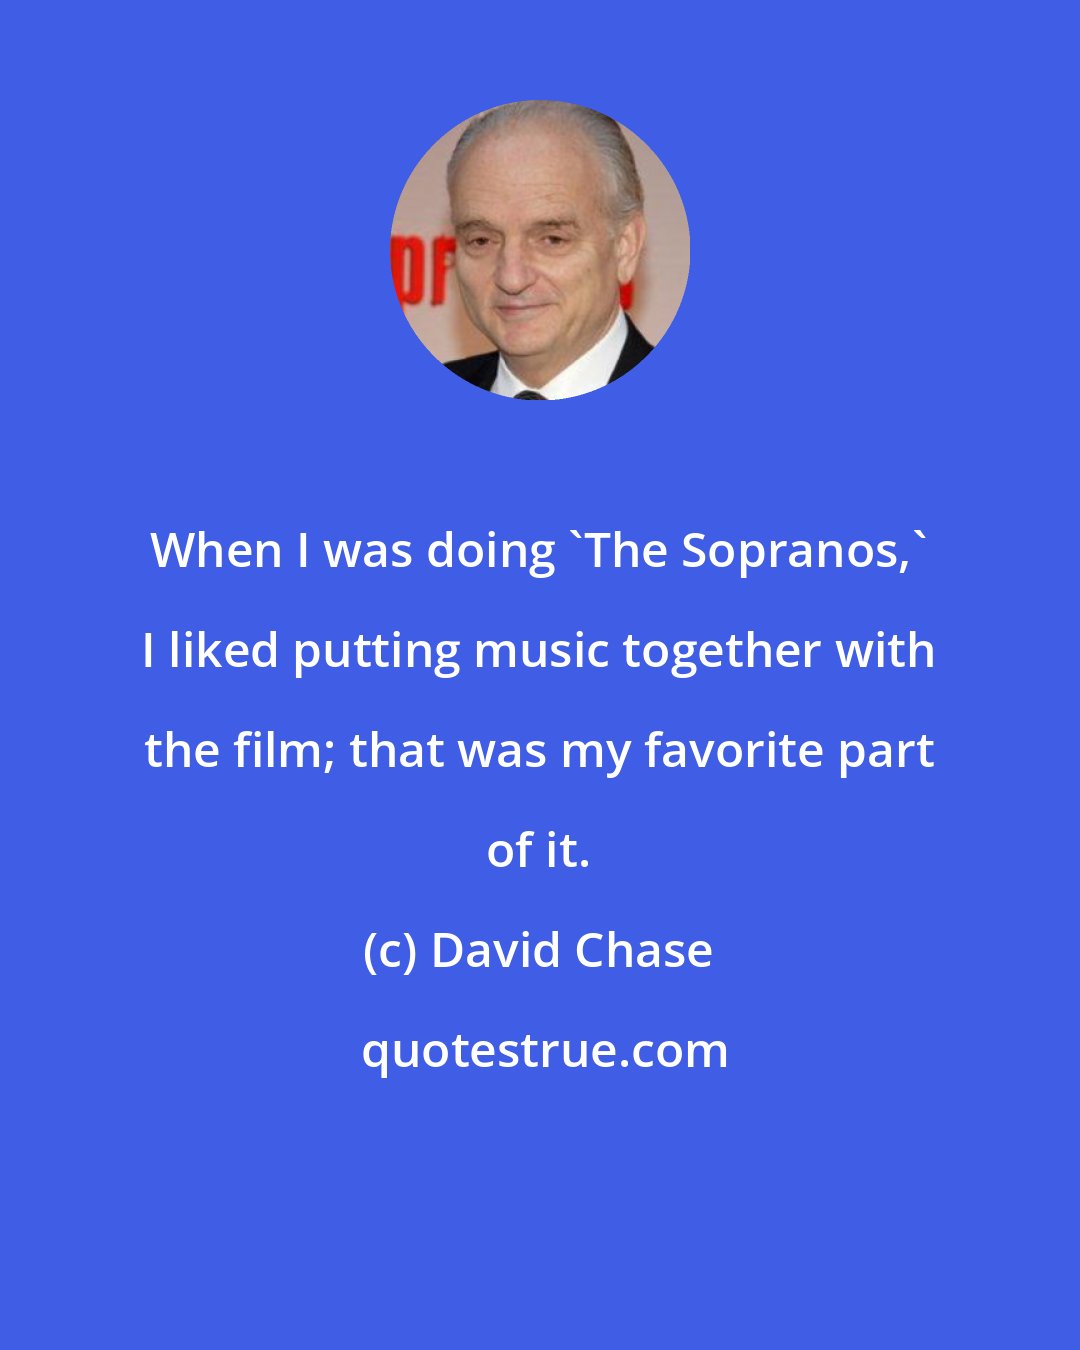 David Chase: When I was doing 'The Sopranos,' I liked putting music together with the film; that was my favorite part of it.